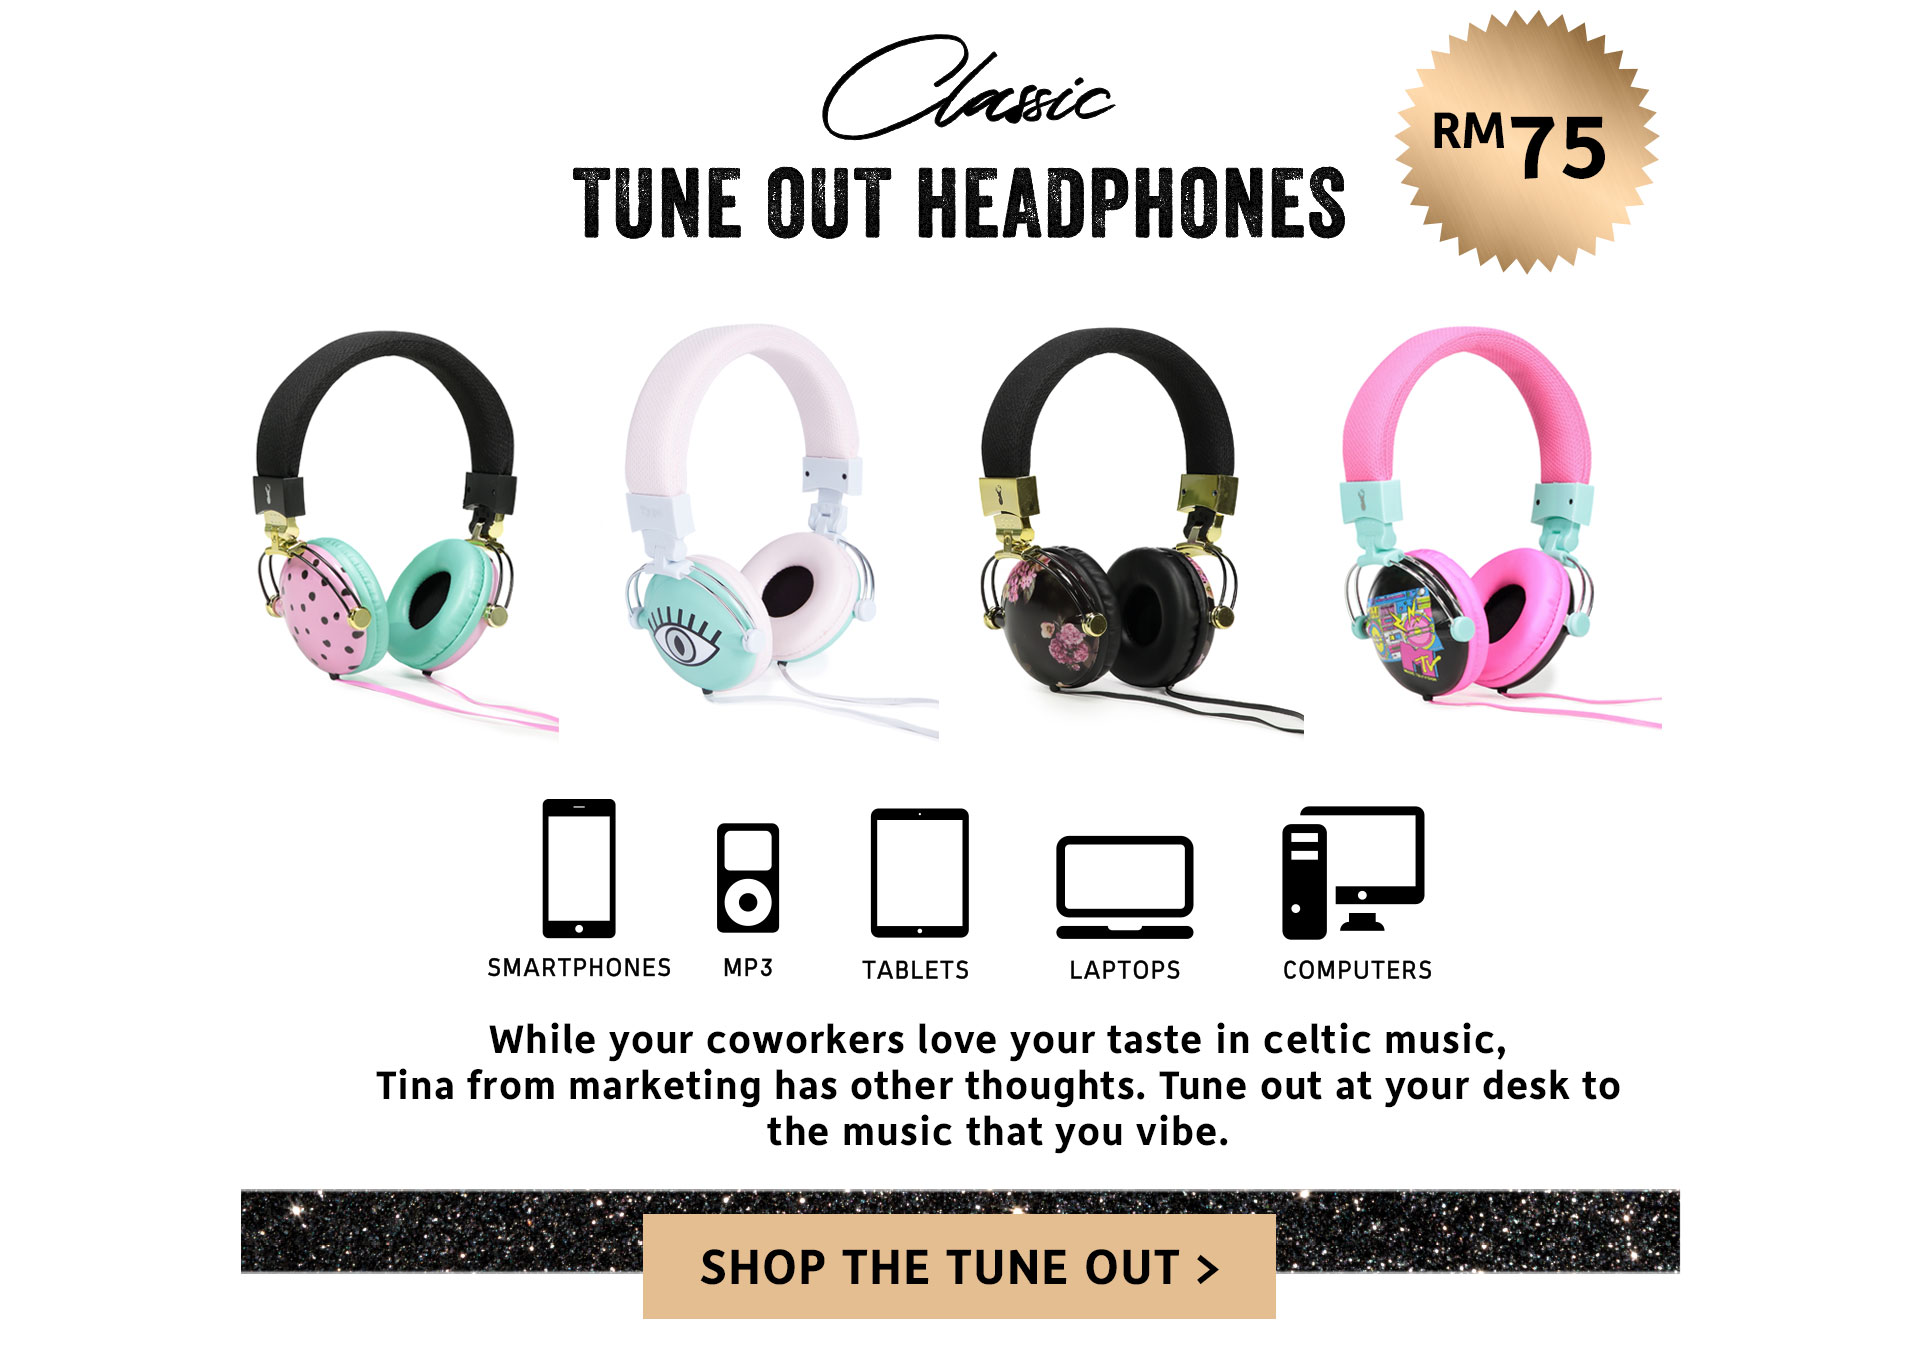 The classic. Shop the Tune out Headphones now.